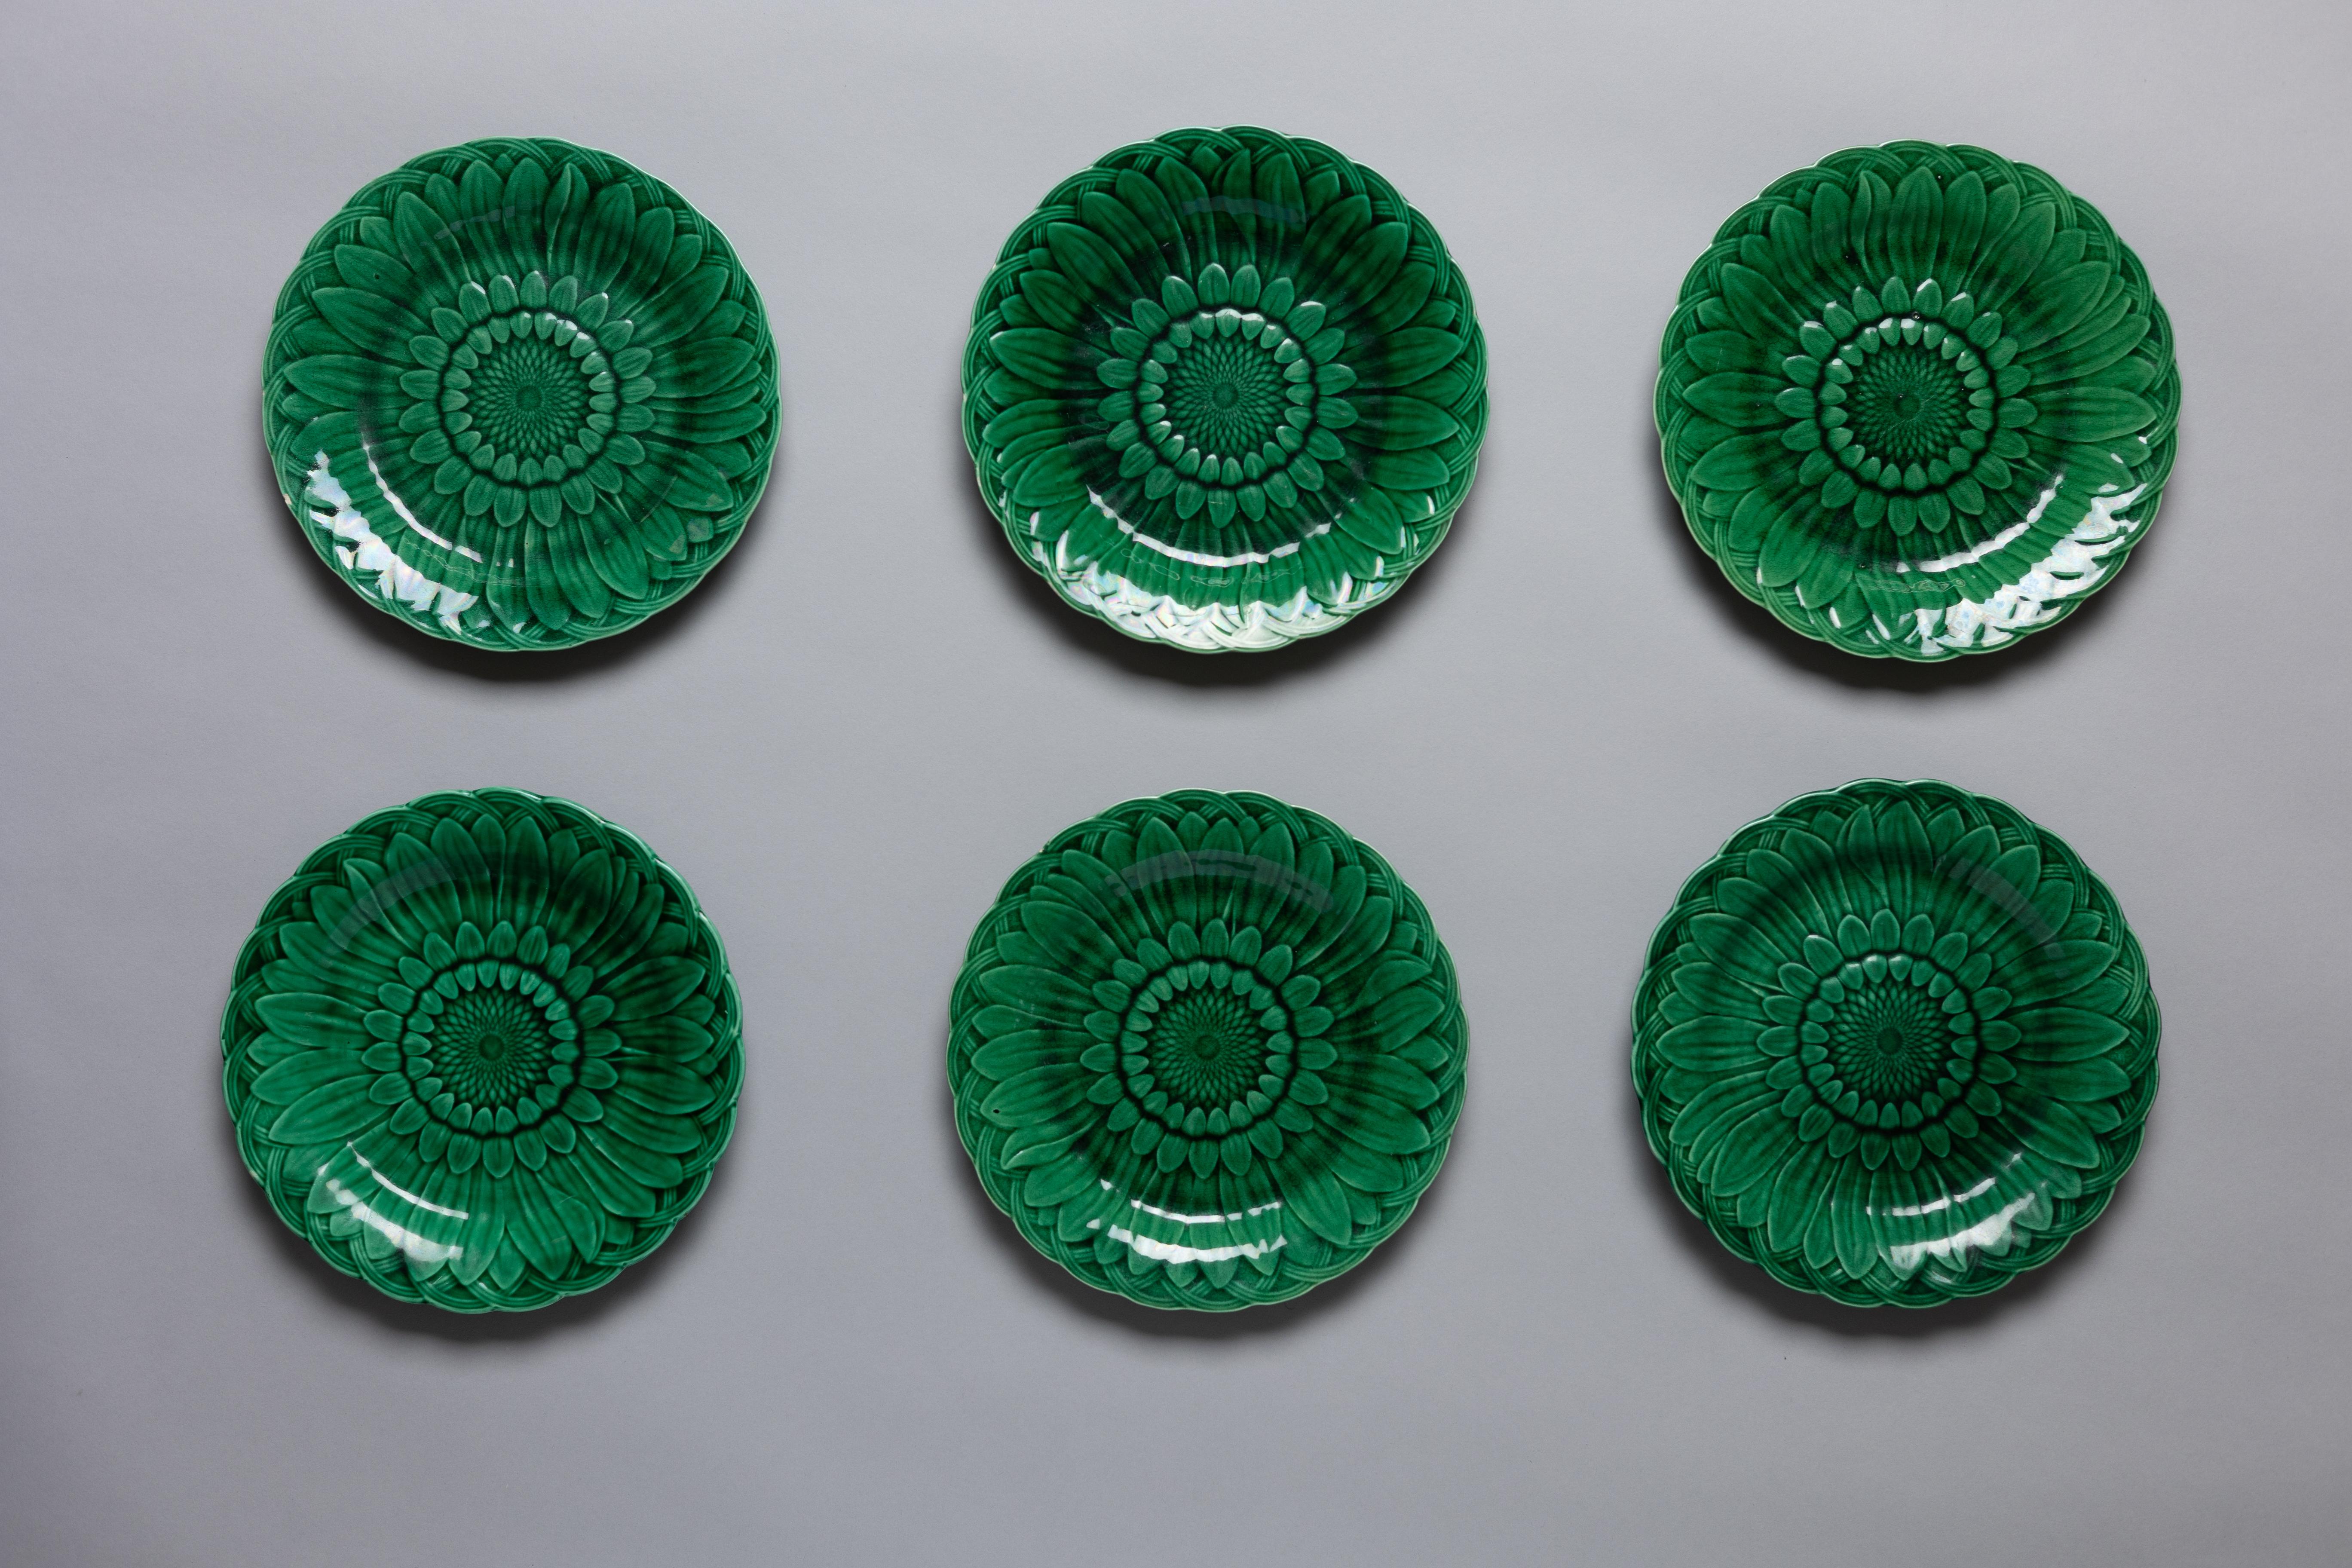 Set of 6 Aesthetic Movement green majolica glazed dinner plates in the ‘Sunflower’ pattern by Wedgwood, made circa 1880.

The sunflower, alongside the calla lily and peacock feather, became an emblem of the late nineteenth-century Aesthetic